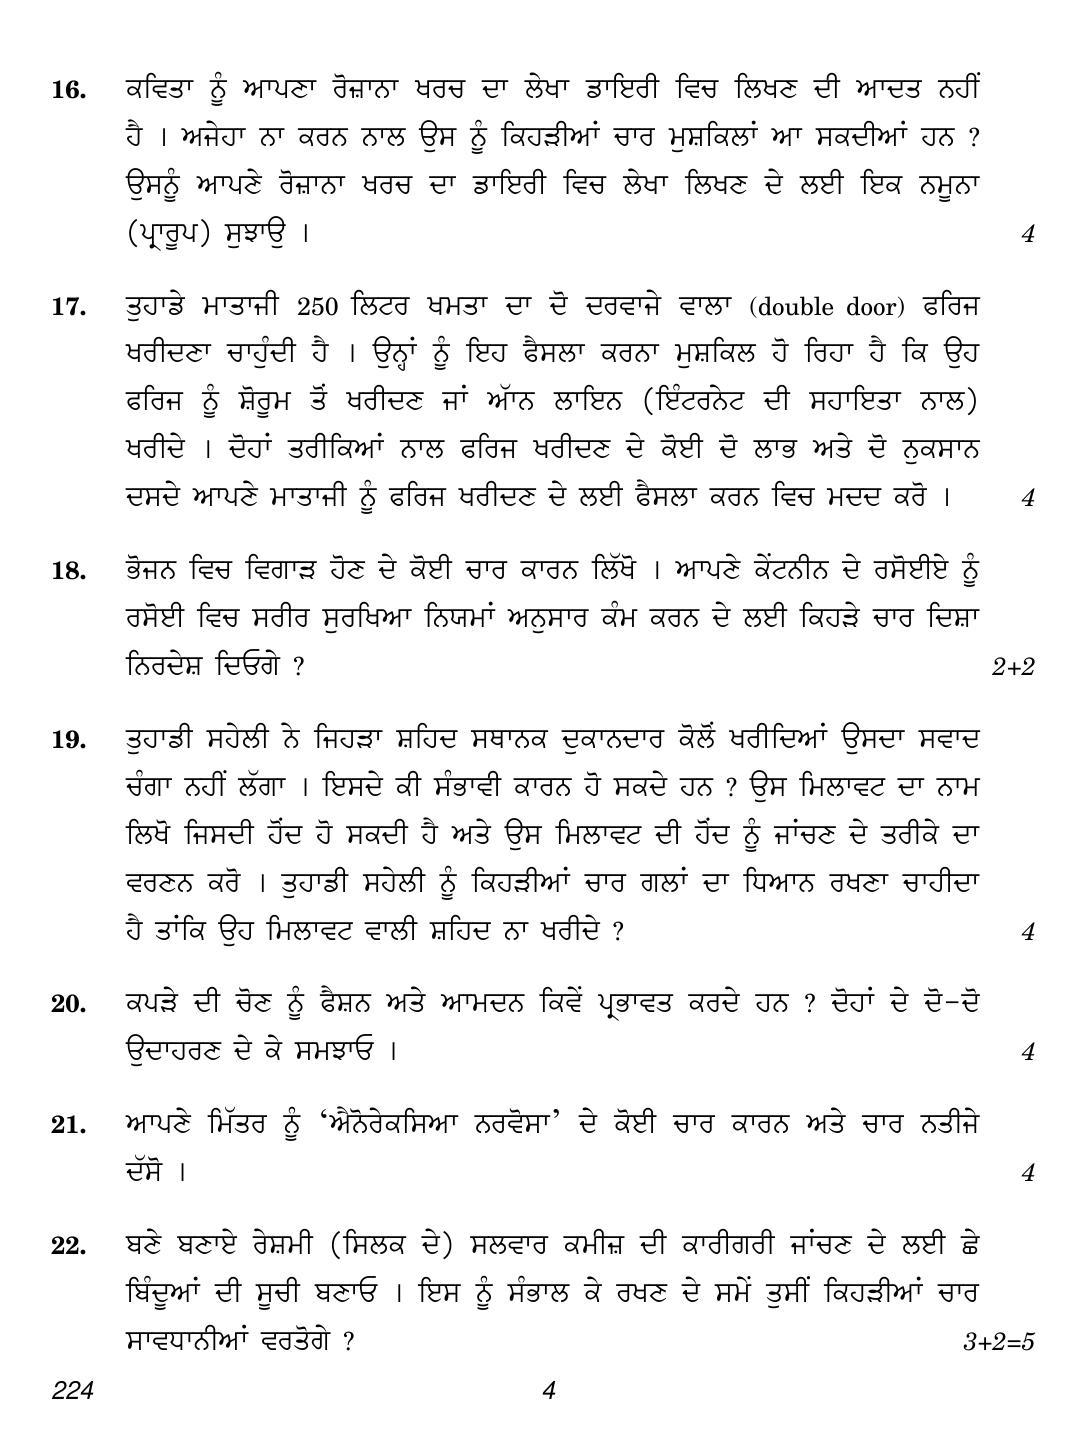 CBSE Class 12 224 (Home Science Punjabi) 2018 Question Paper - Page 4